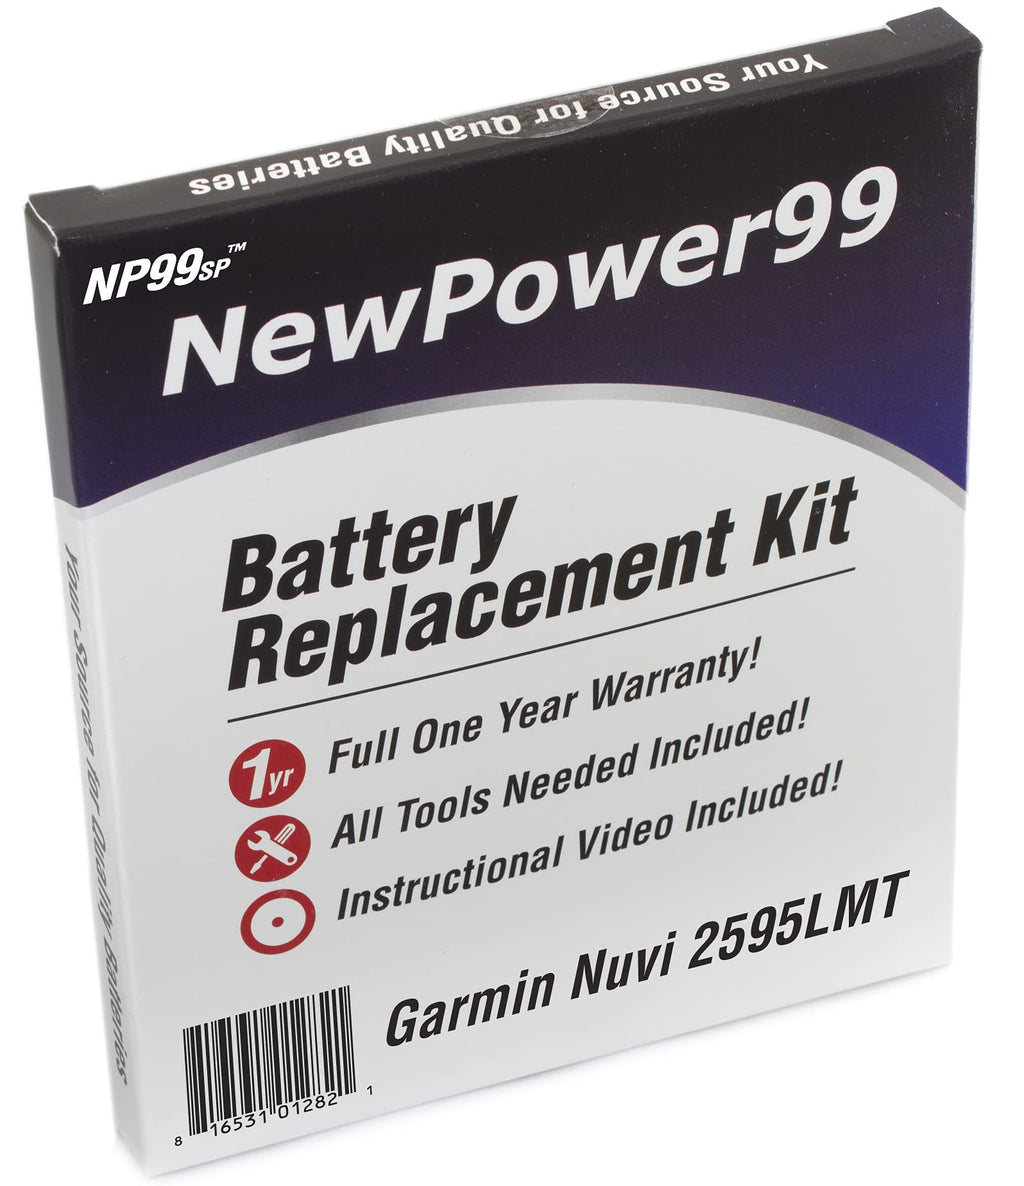 Battery Kit for Garmin Nuvi 2595LMT with Video Instructions, Tools, and Extended Life Battery from NewPower99